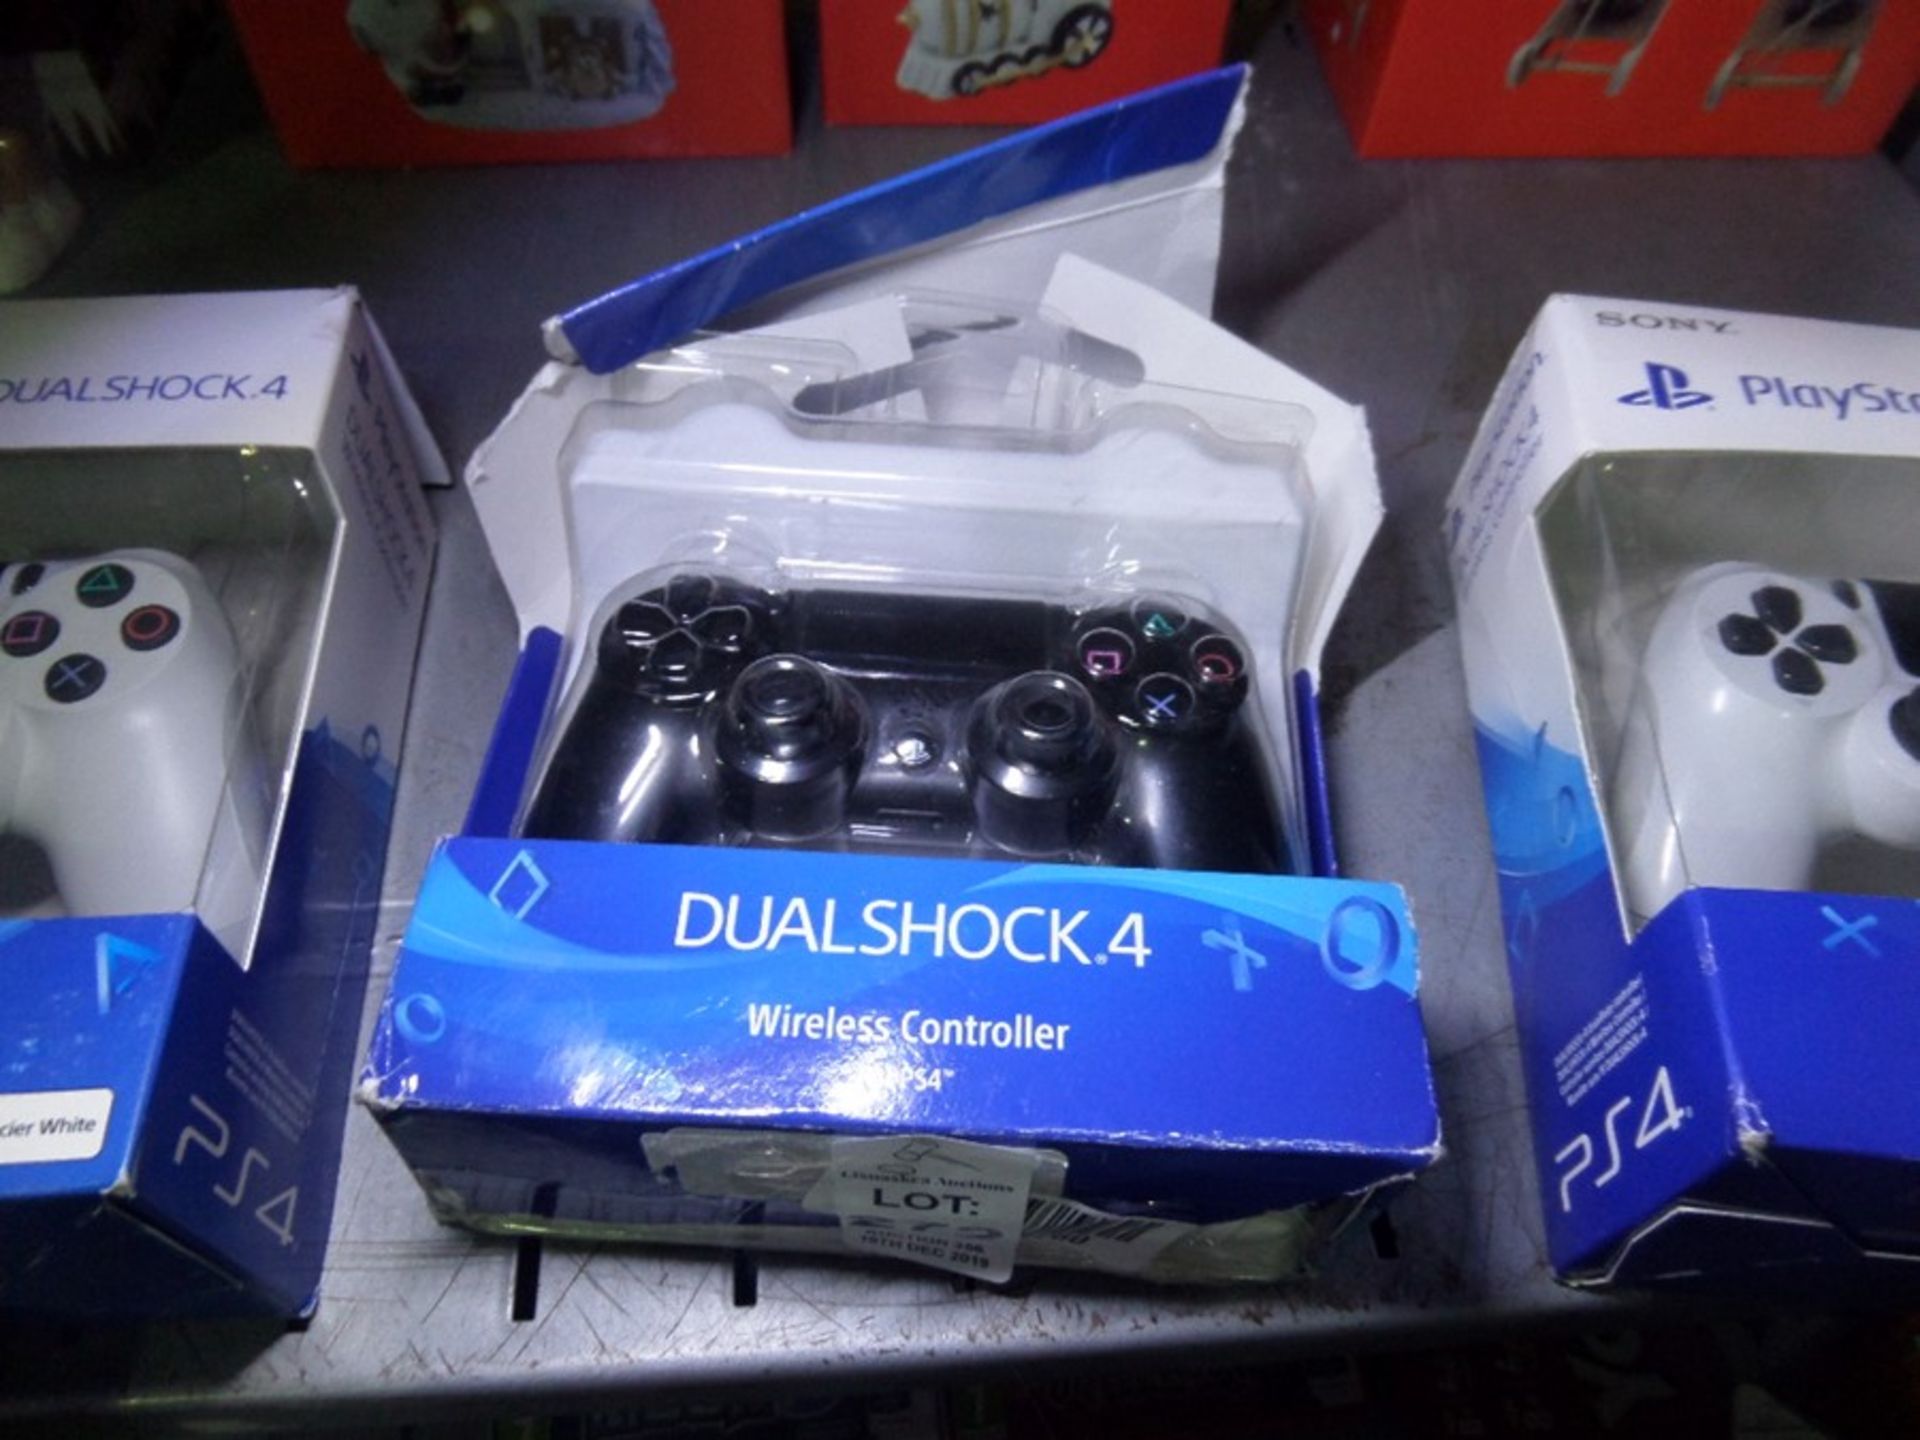 SONY PLAYSTATION DUAL SHOCK 4 WIRELESS CONTROLLER BOXED SHOP CLEARANCE